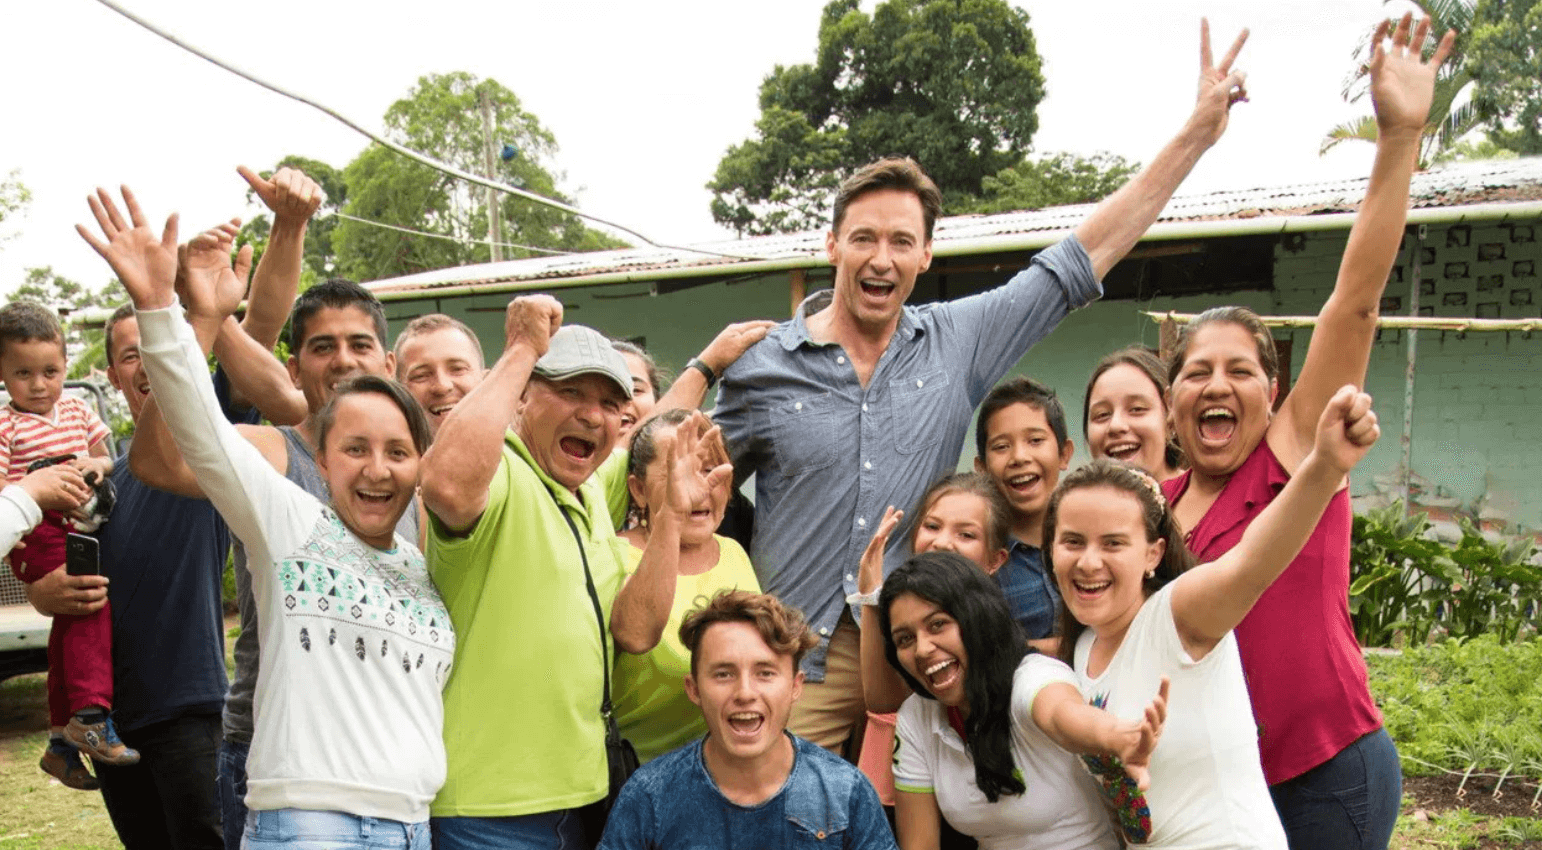 Hugh Jackman provided 145 major home renovation projects for families in the coffee farming community and have an additional 29 on the way. This included plumbing, roofs, kitchens, flooring, windows, water storage tanks, electricity, additions for growing families and even some entirely new homes.